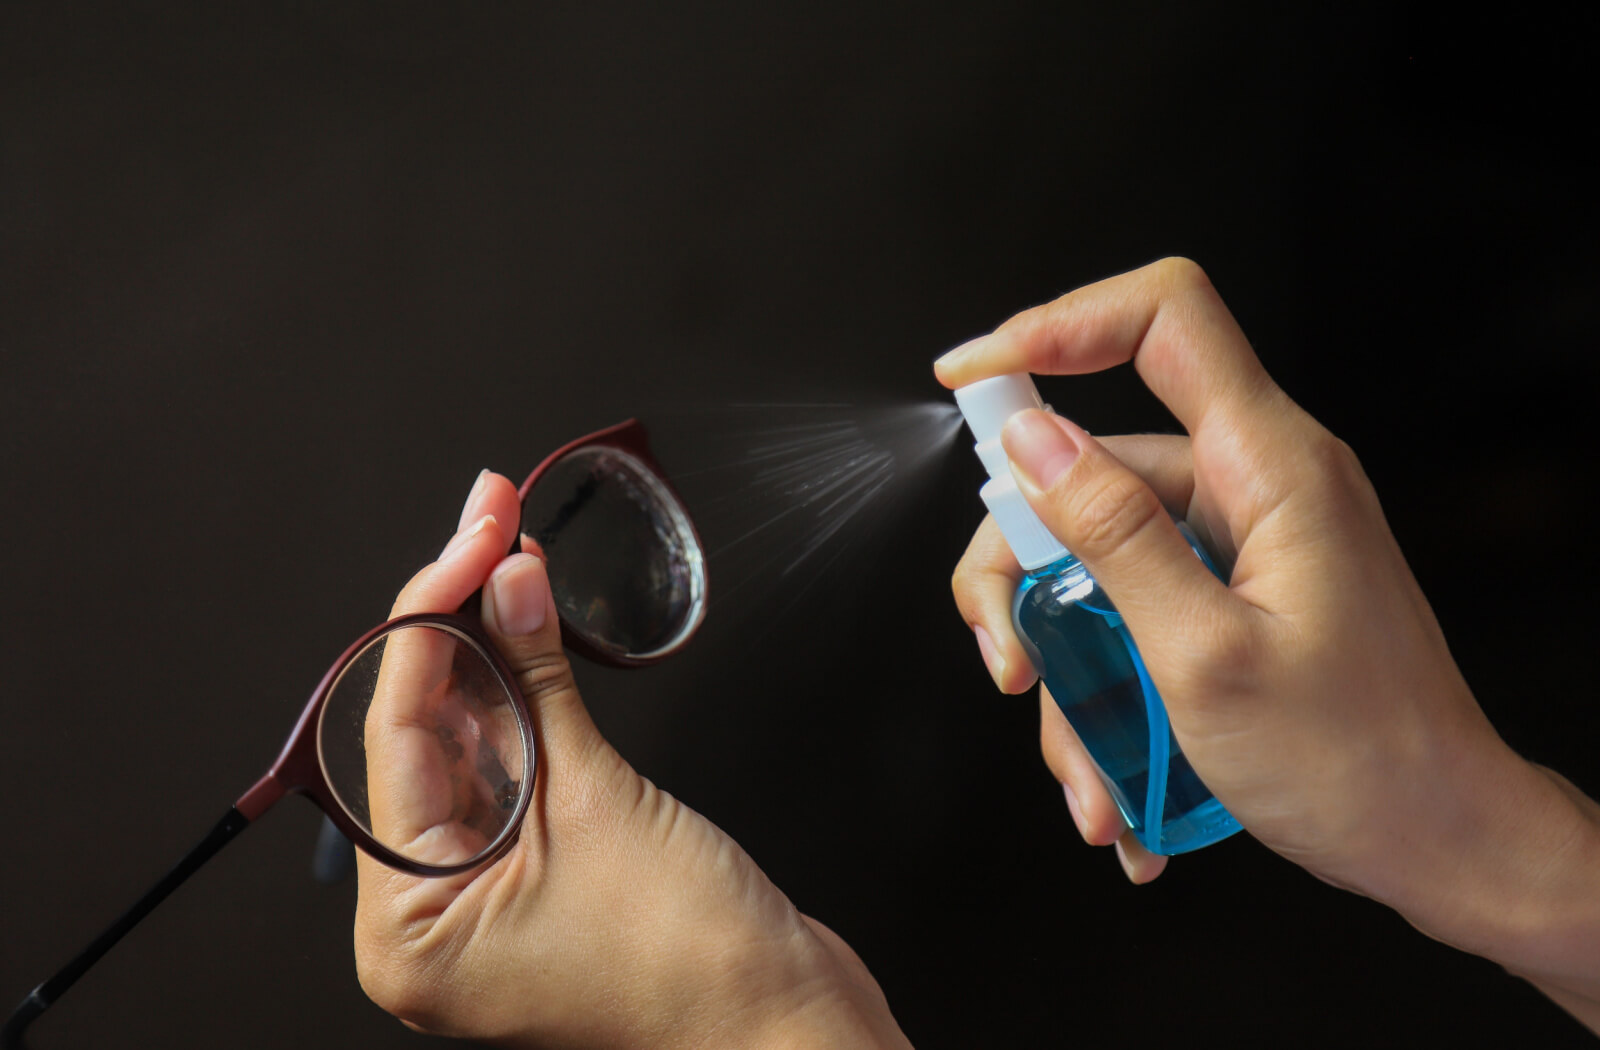 A close-up of hands spraying a cleaning solution unto a pair of eyeglasses.